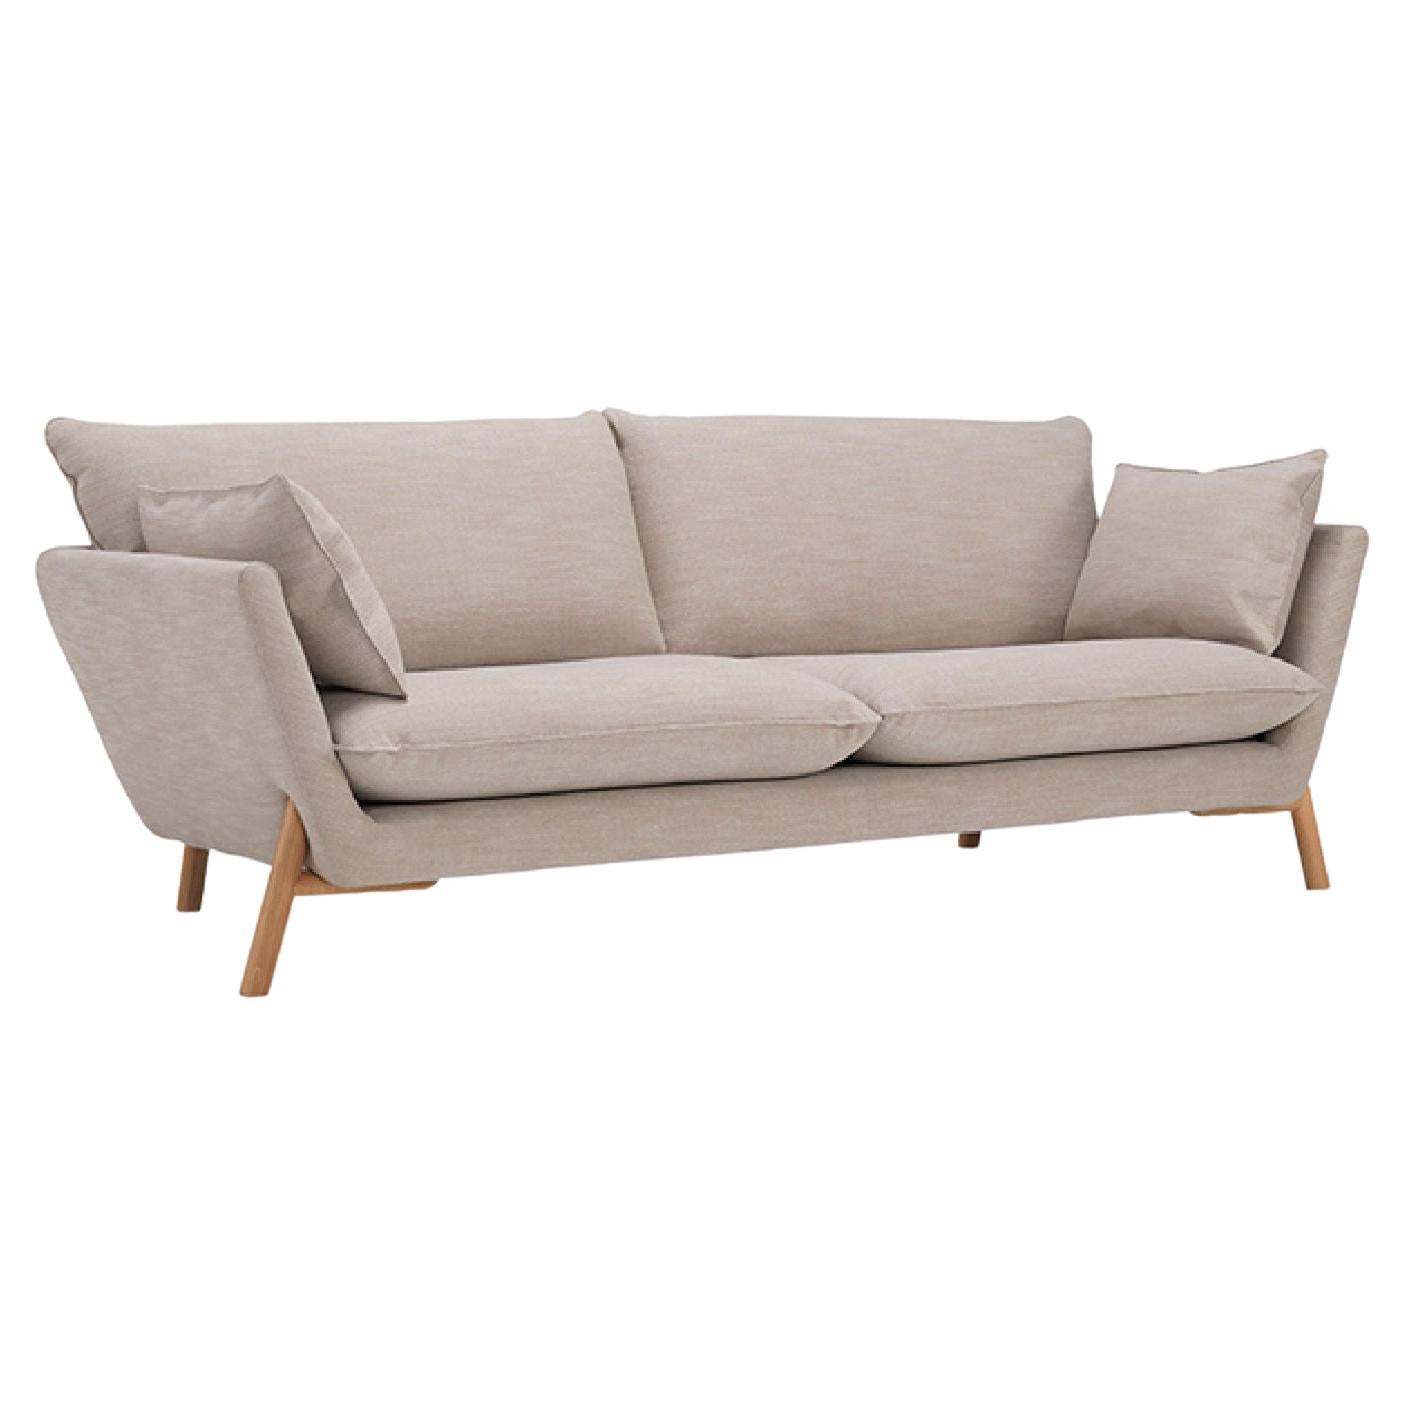 Hayche Nave 2 Seater Sofa - Brown, UK, Made to Order